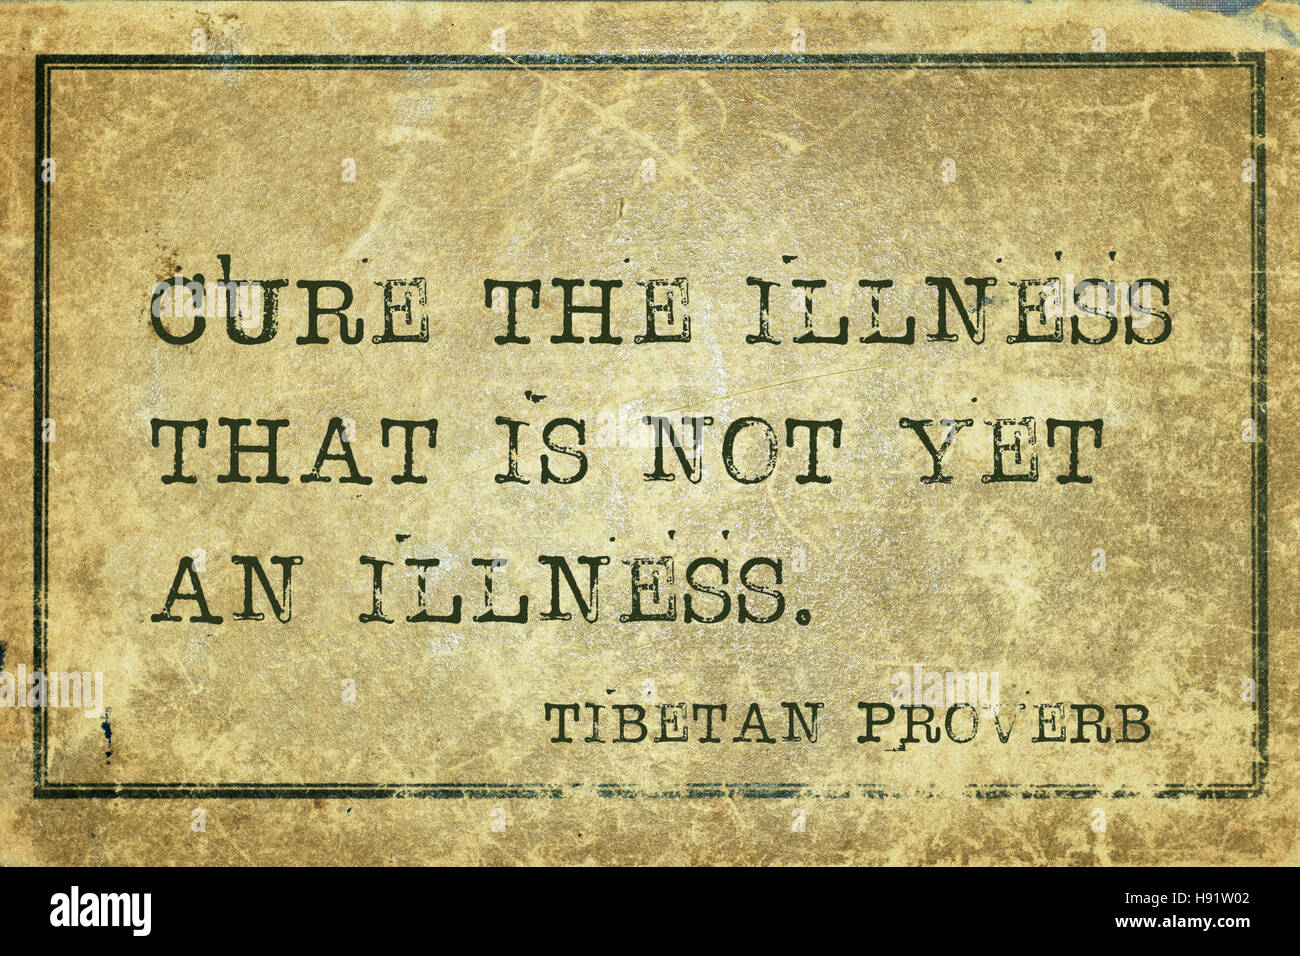 Cure the illness that is not yet  - ancient Tibetan proverb printed on grunge vintage cardboard Stock Photo